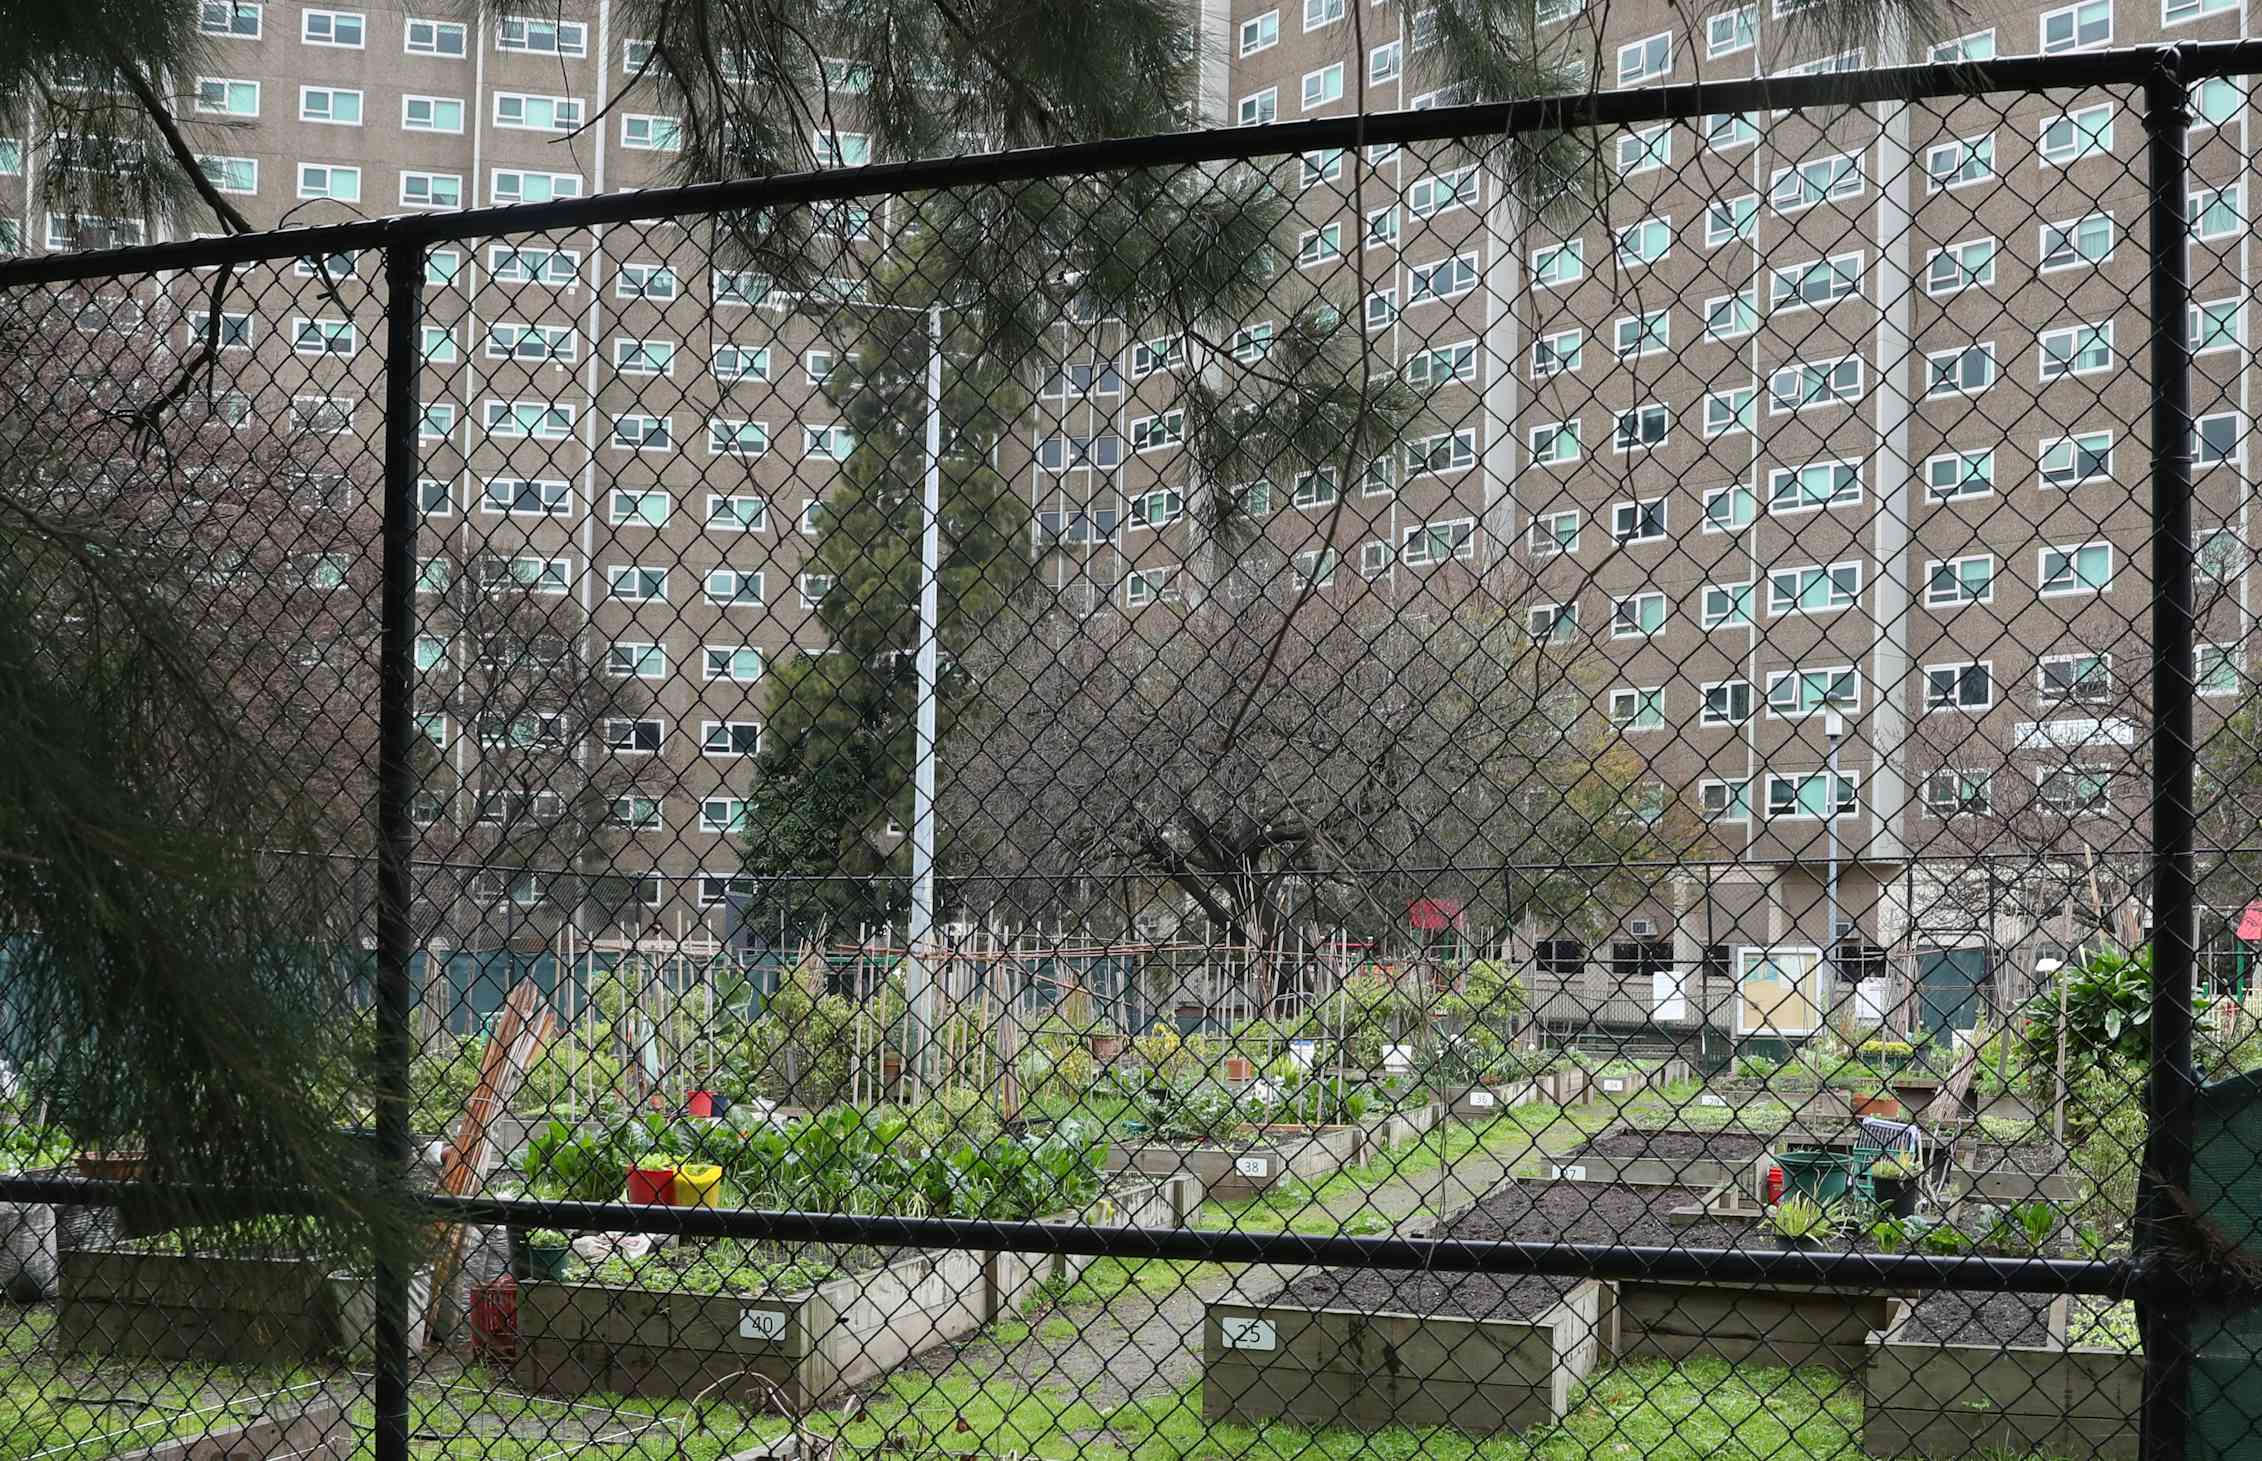 public housing with vegetable gardens in foreground